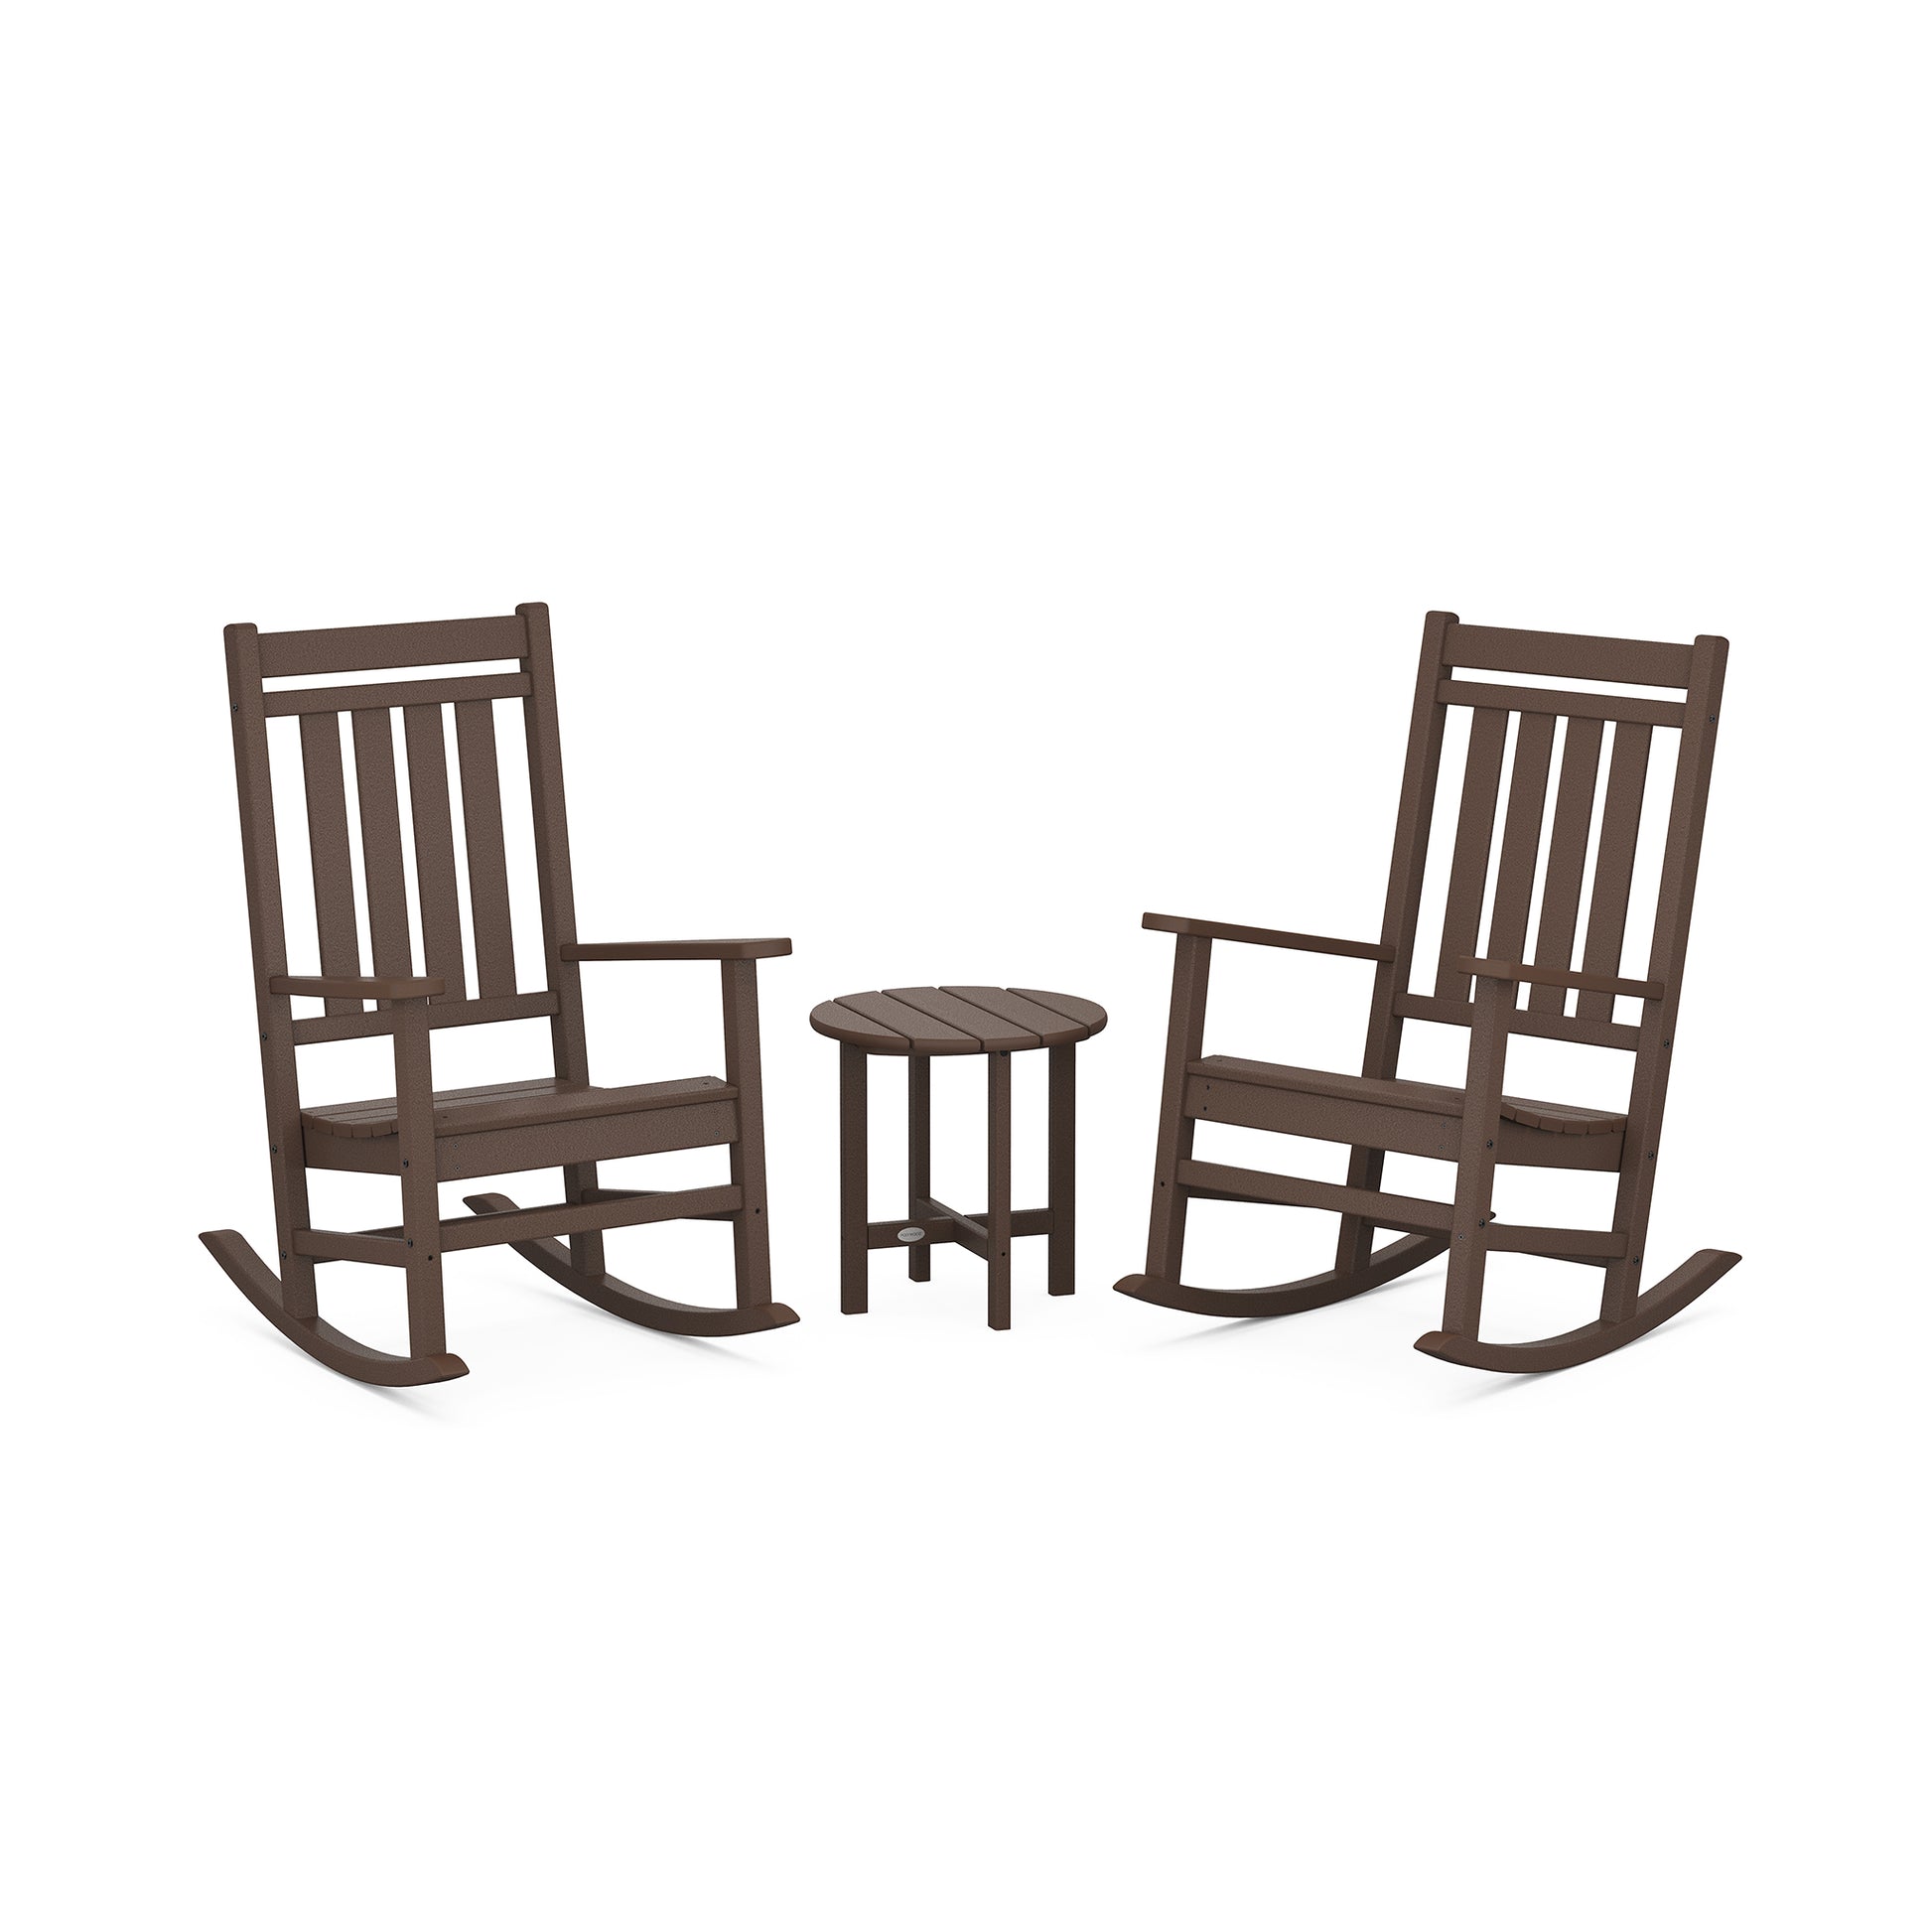 Two dark wooden POLYWOOD Estate 3-Piece Rocking Chair Sets facing each other with a small round matching table in between, all set against a plain white background.